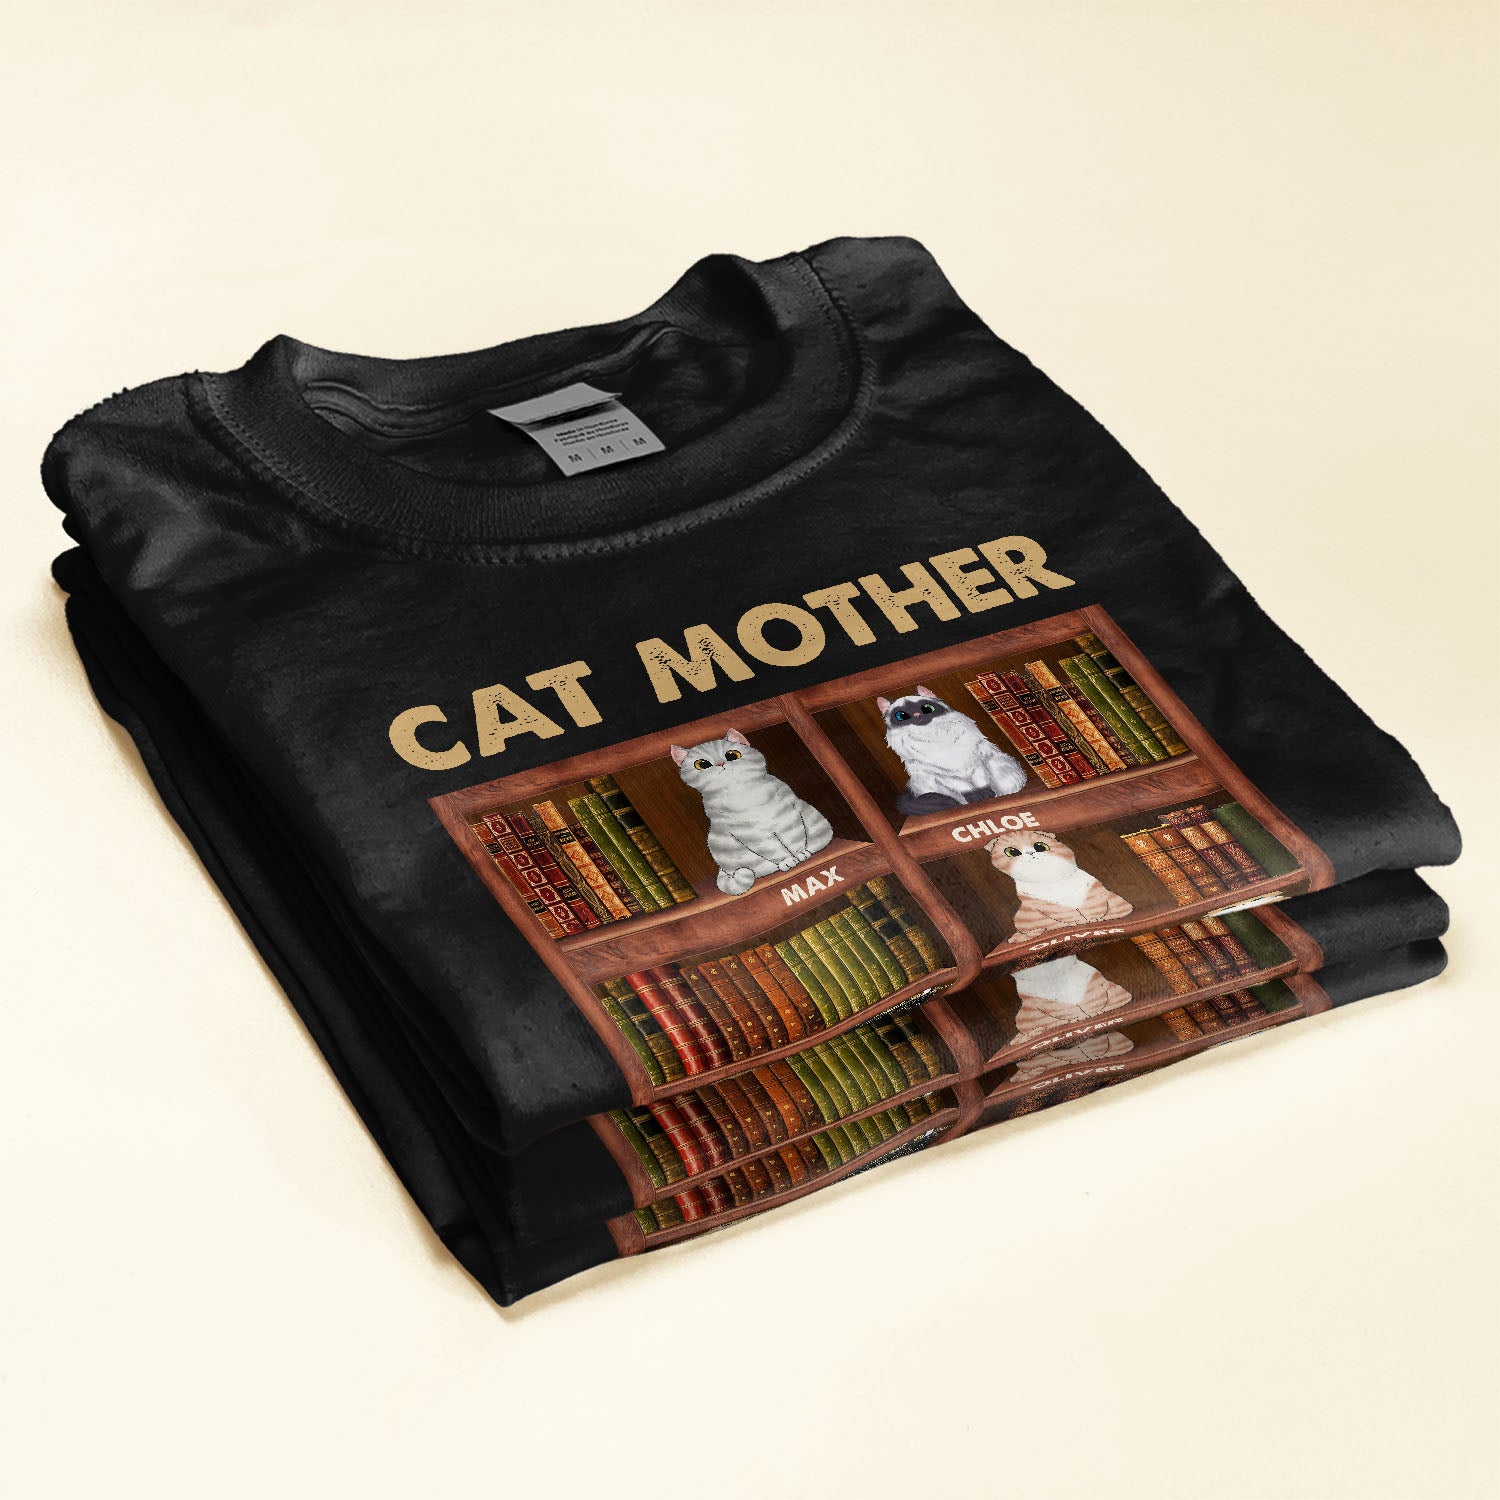 Cat Parents Book Lovers - Personalized Shirt - Birthday Gift For Cat Mom, Cat Dad